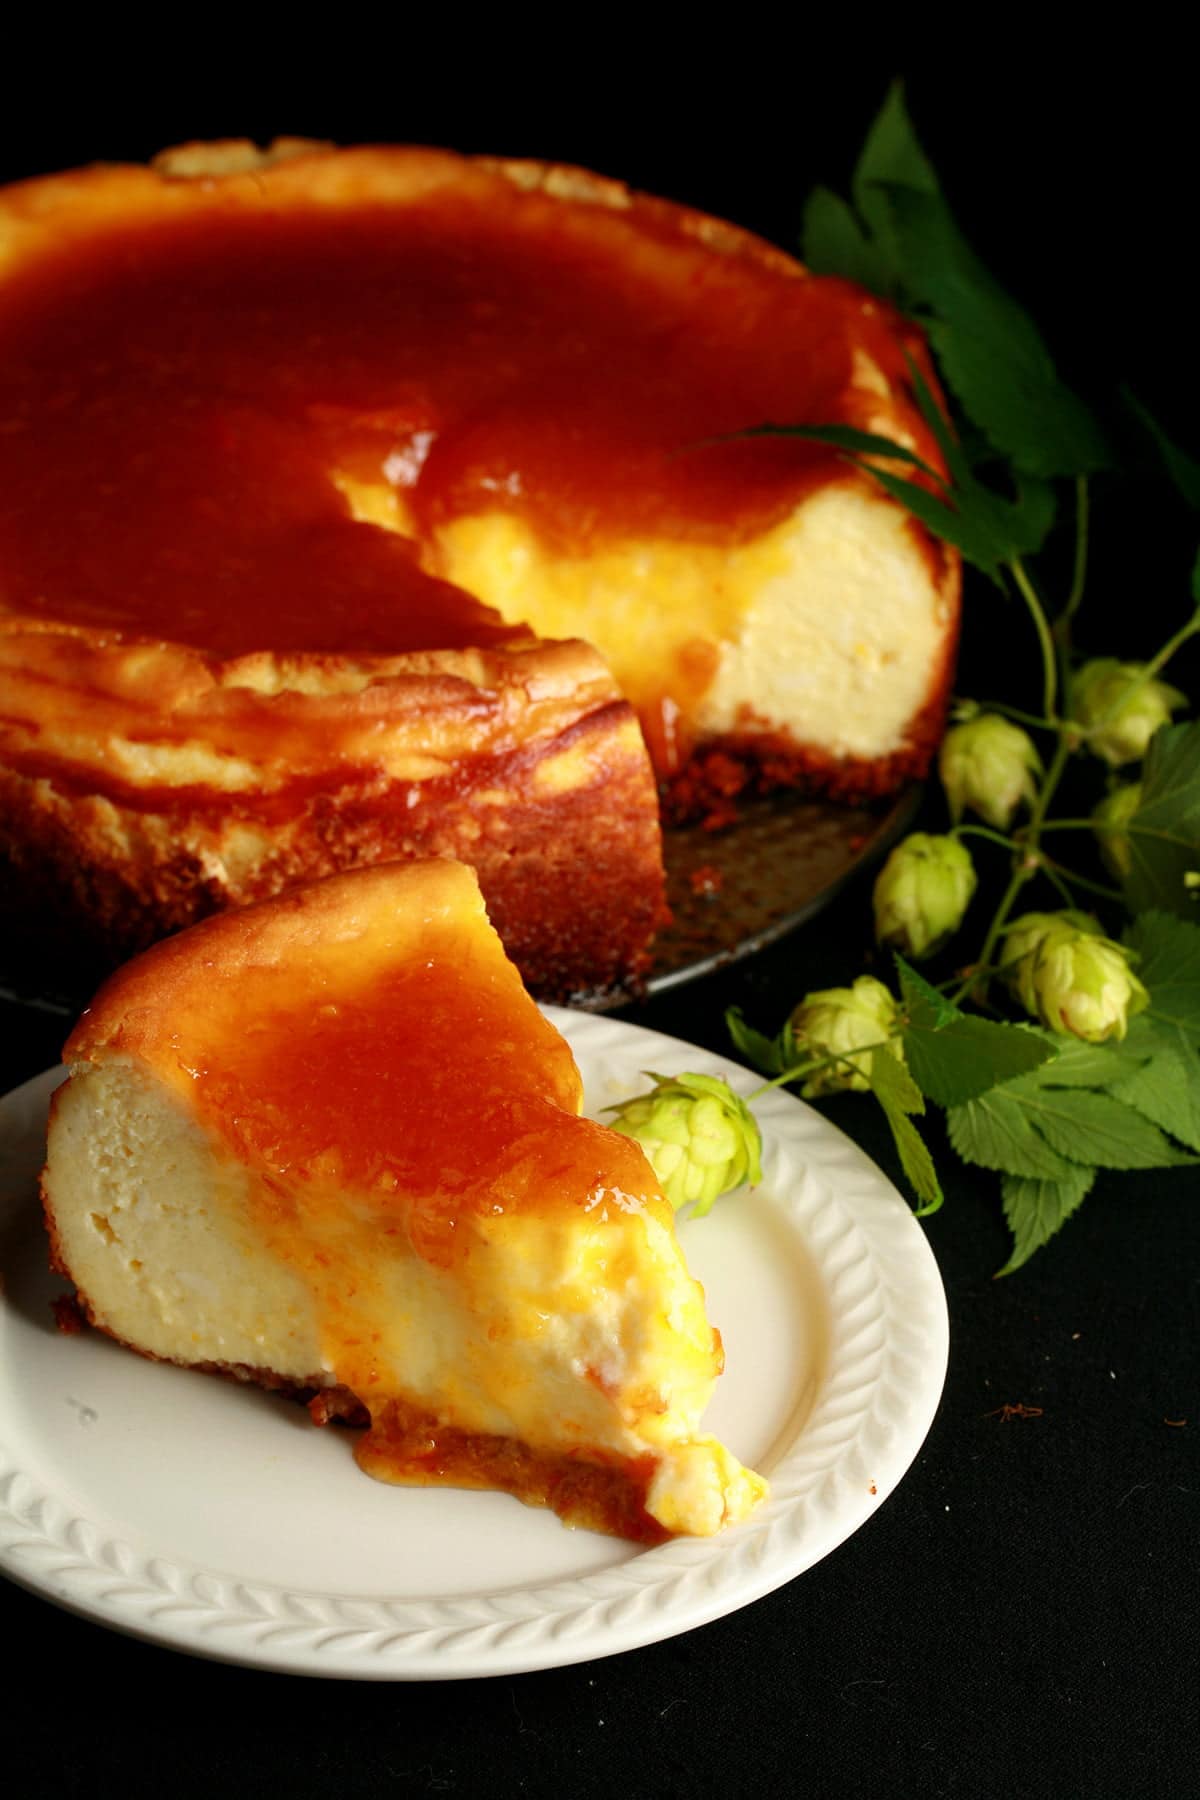 A slice of hopped cheesecake with citrus glaze. The cheesecake is very pale yellow, topped with a bright orange glaze. It sits on a white plate, with a piece of fresh hop bine next to it, with the remainder of the cheesecake in the background.